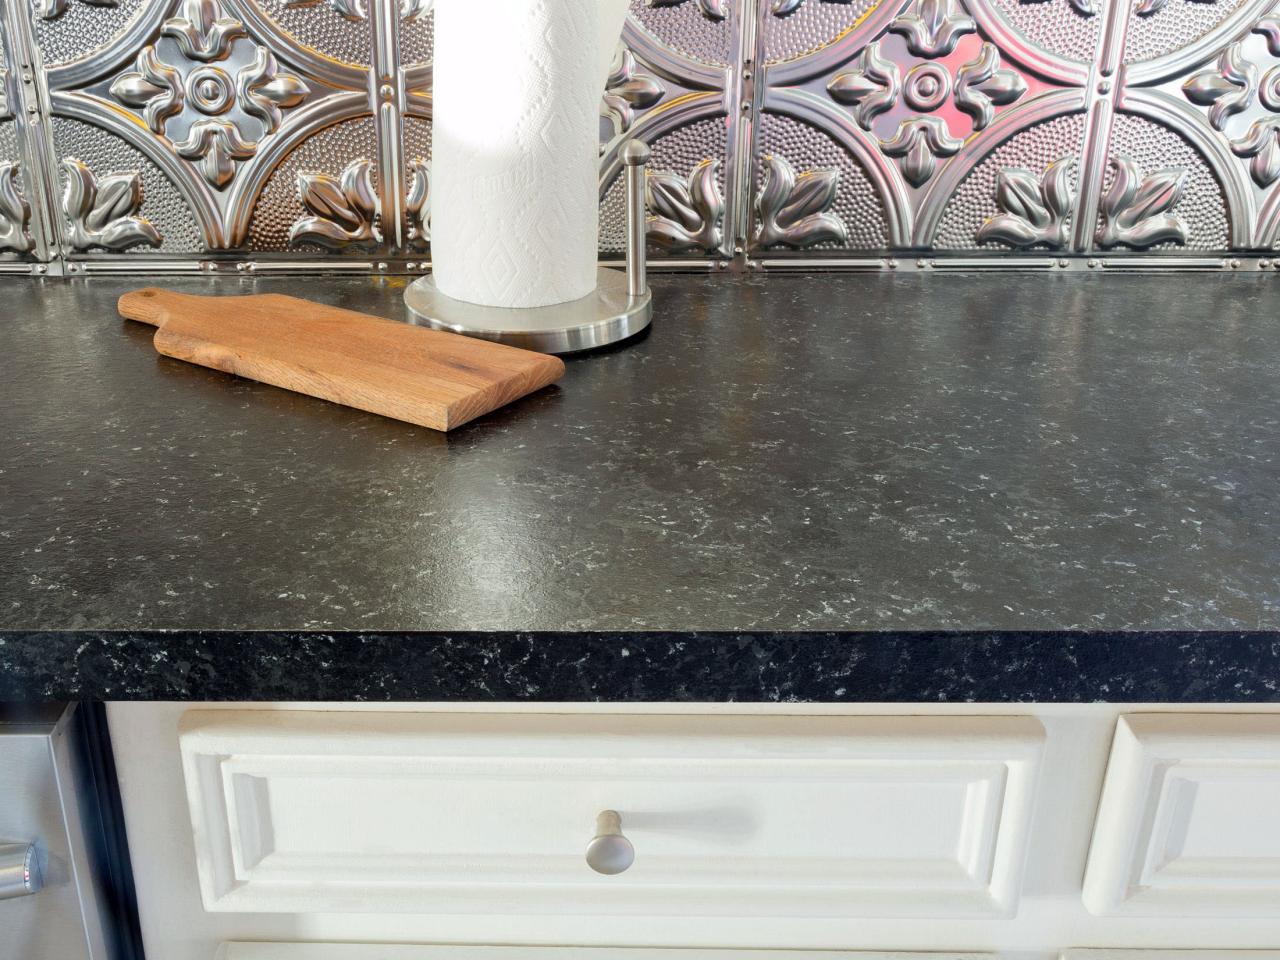 How To Paint A Laminate Countertop, How To Paint A Wood Countertop